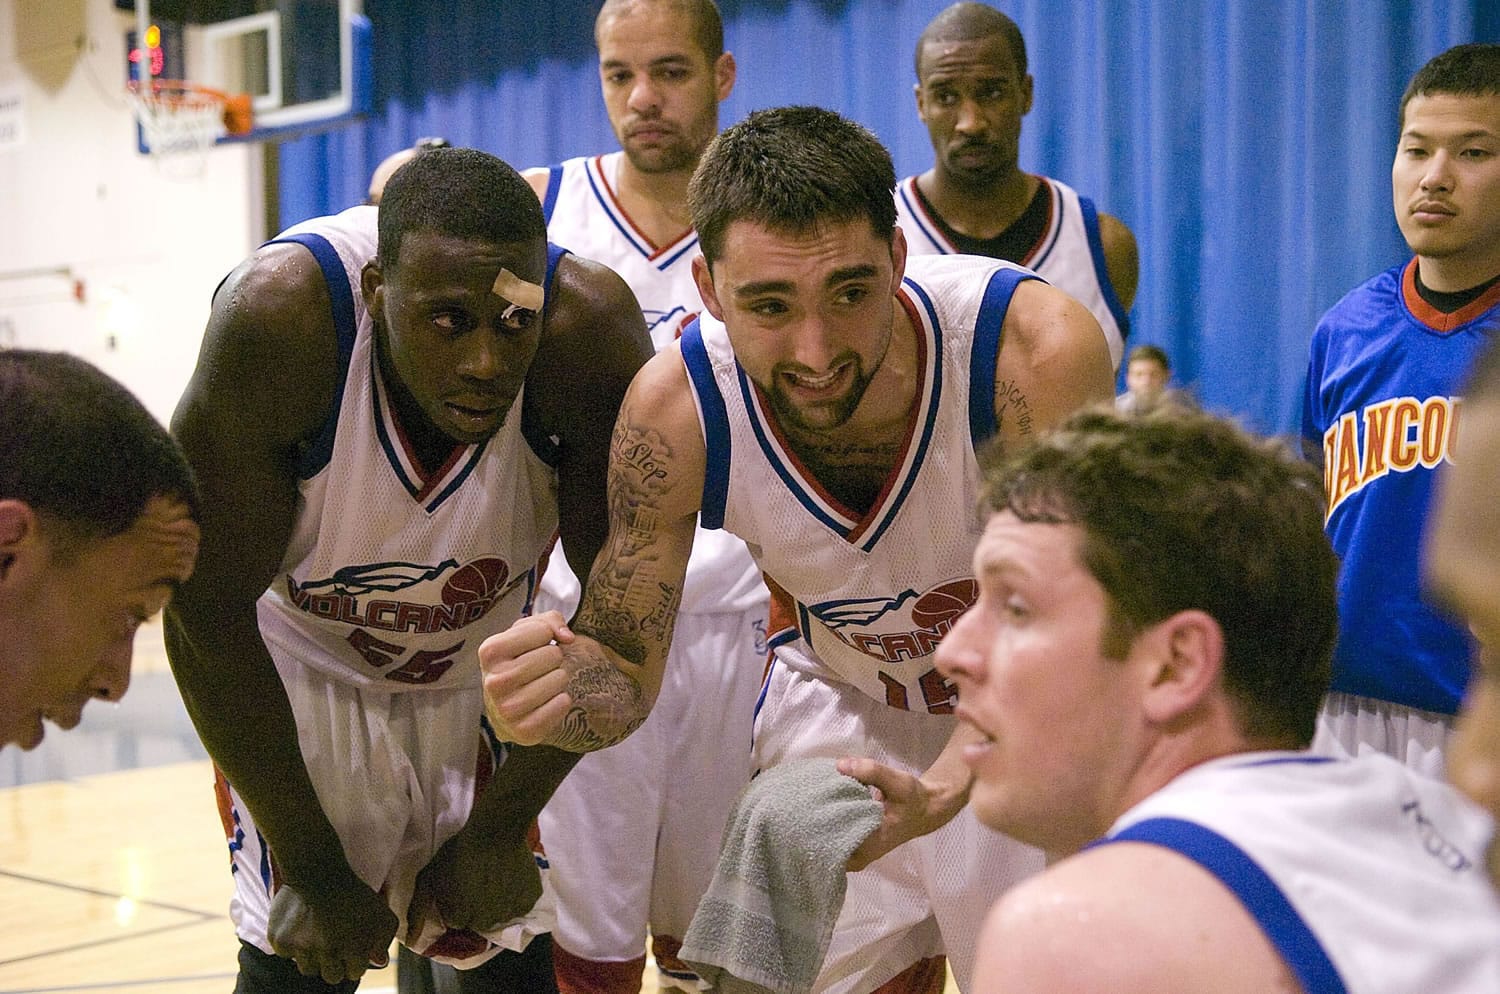 Alex Hartman, center, used his experience with the Vancouver Volcanoes to earns a shot at the NBA Development League.